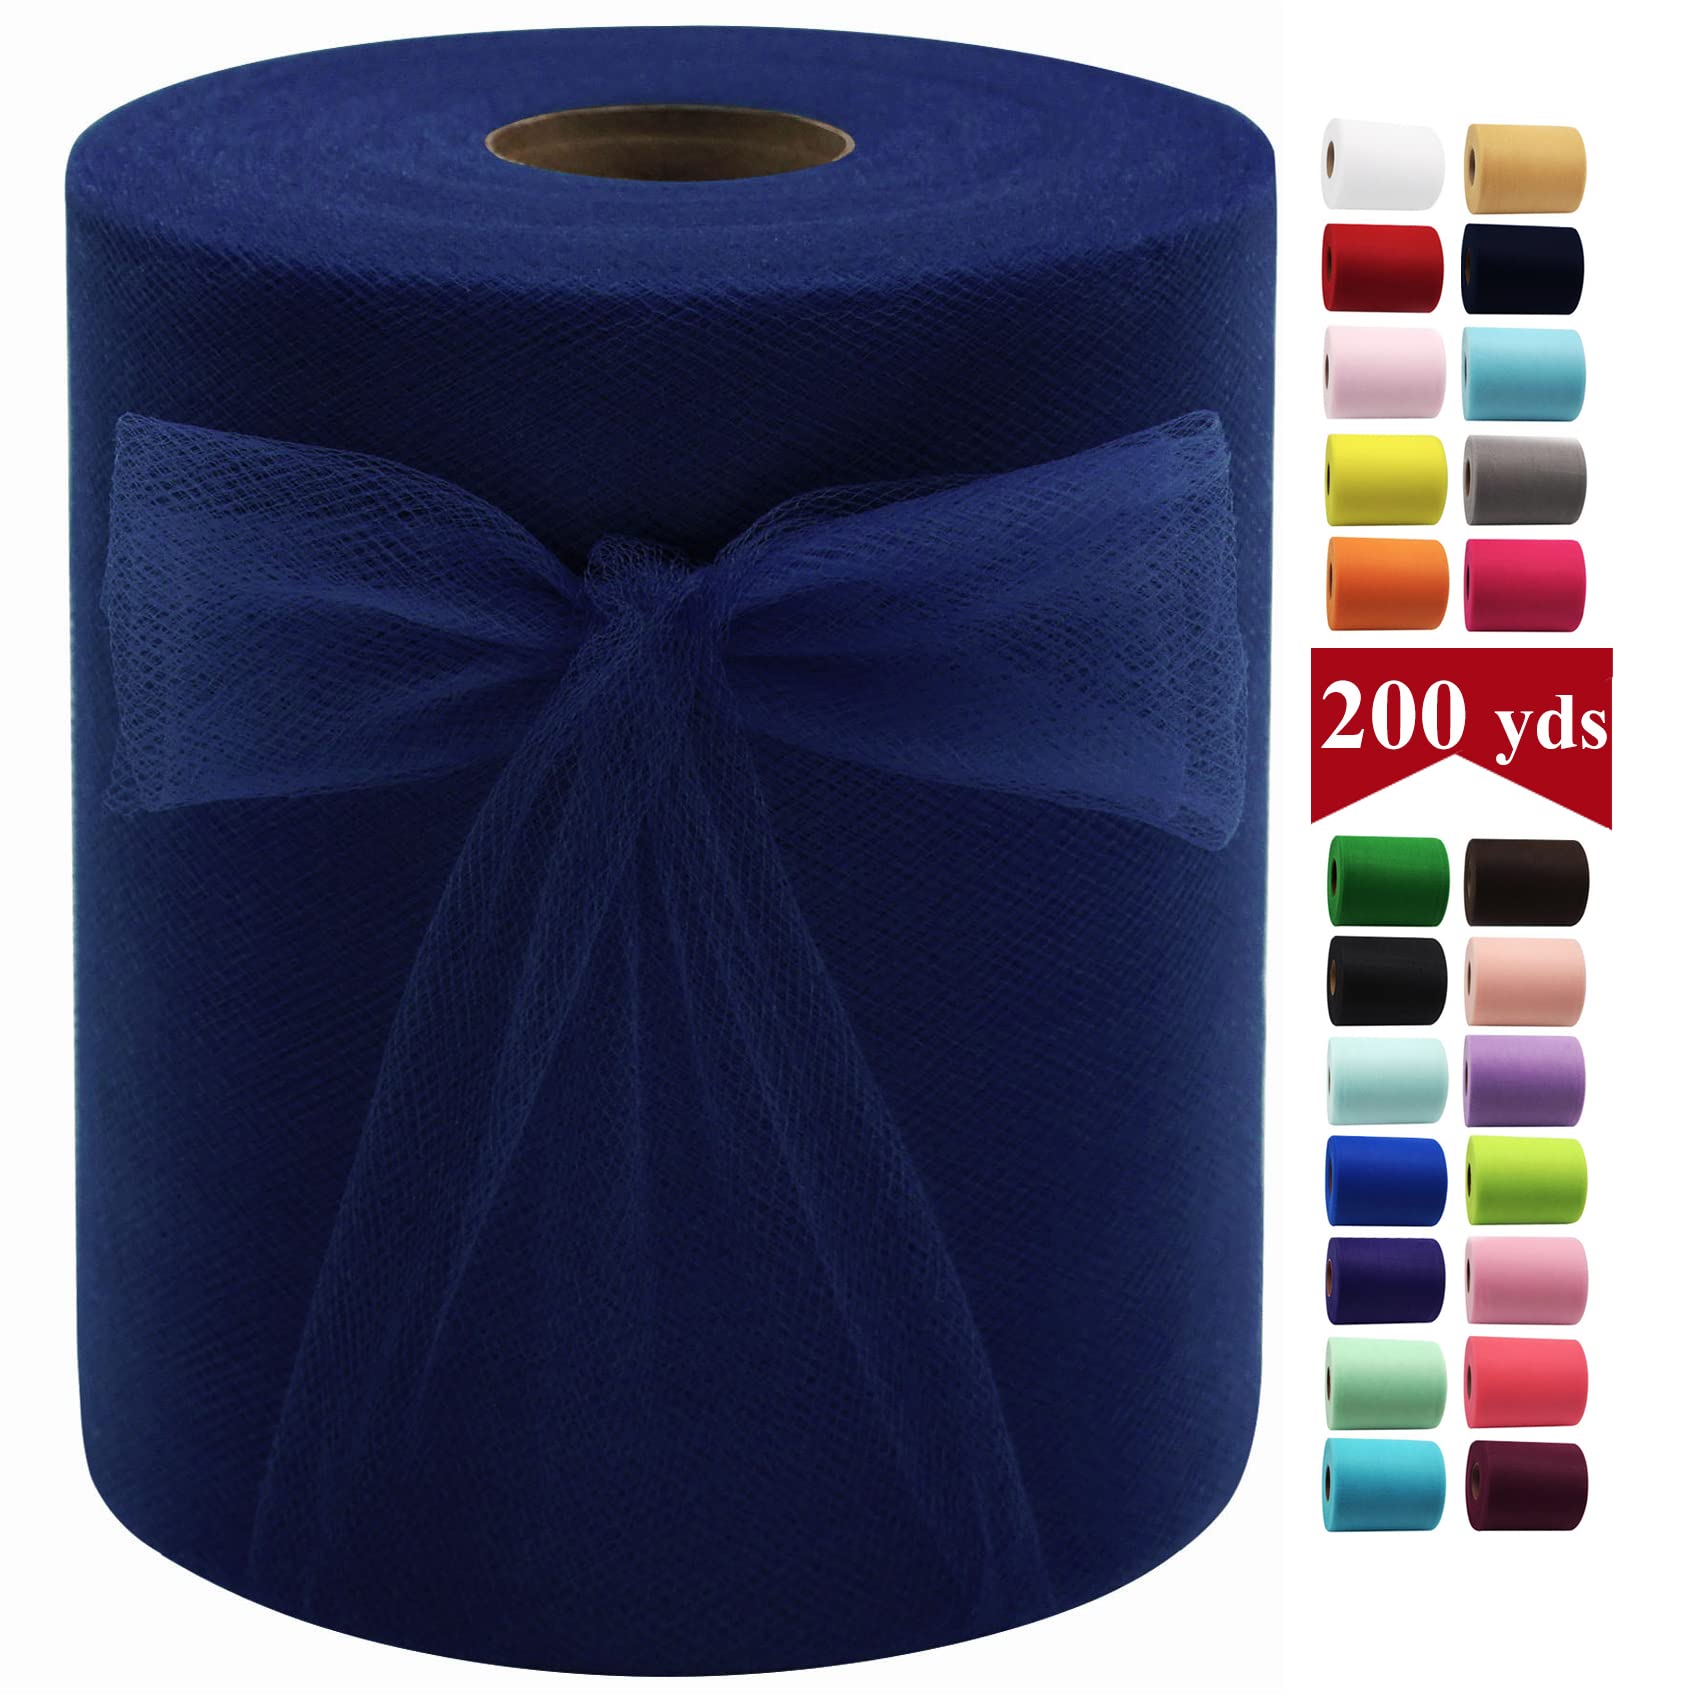 Tulle Ribbon, 6 x 25 yds - Bags & Bows by S. W Packaging